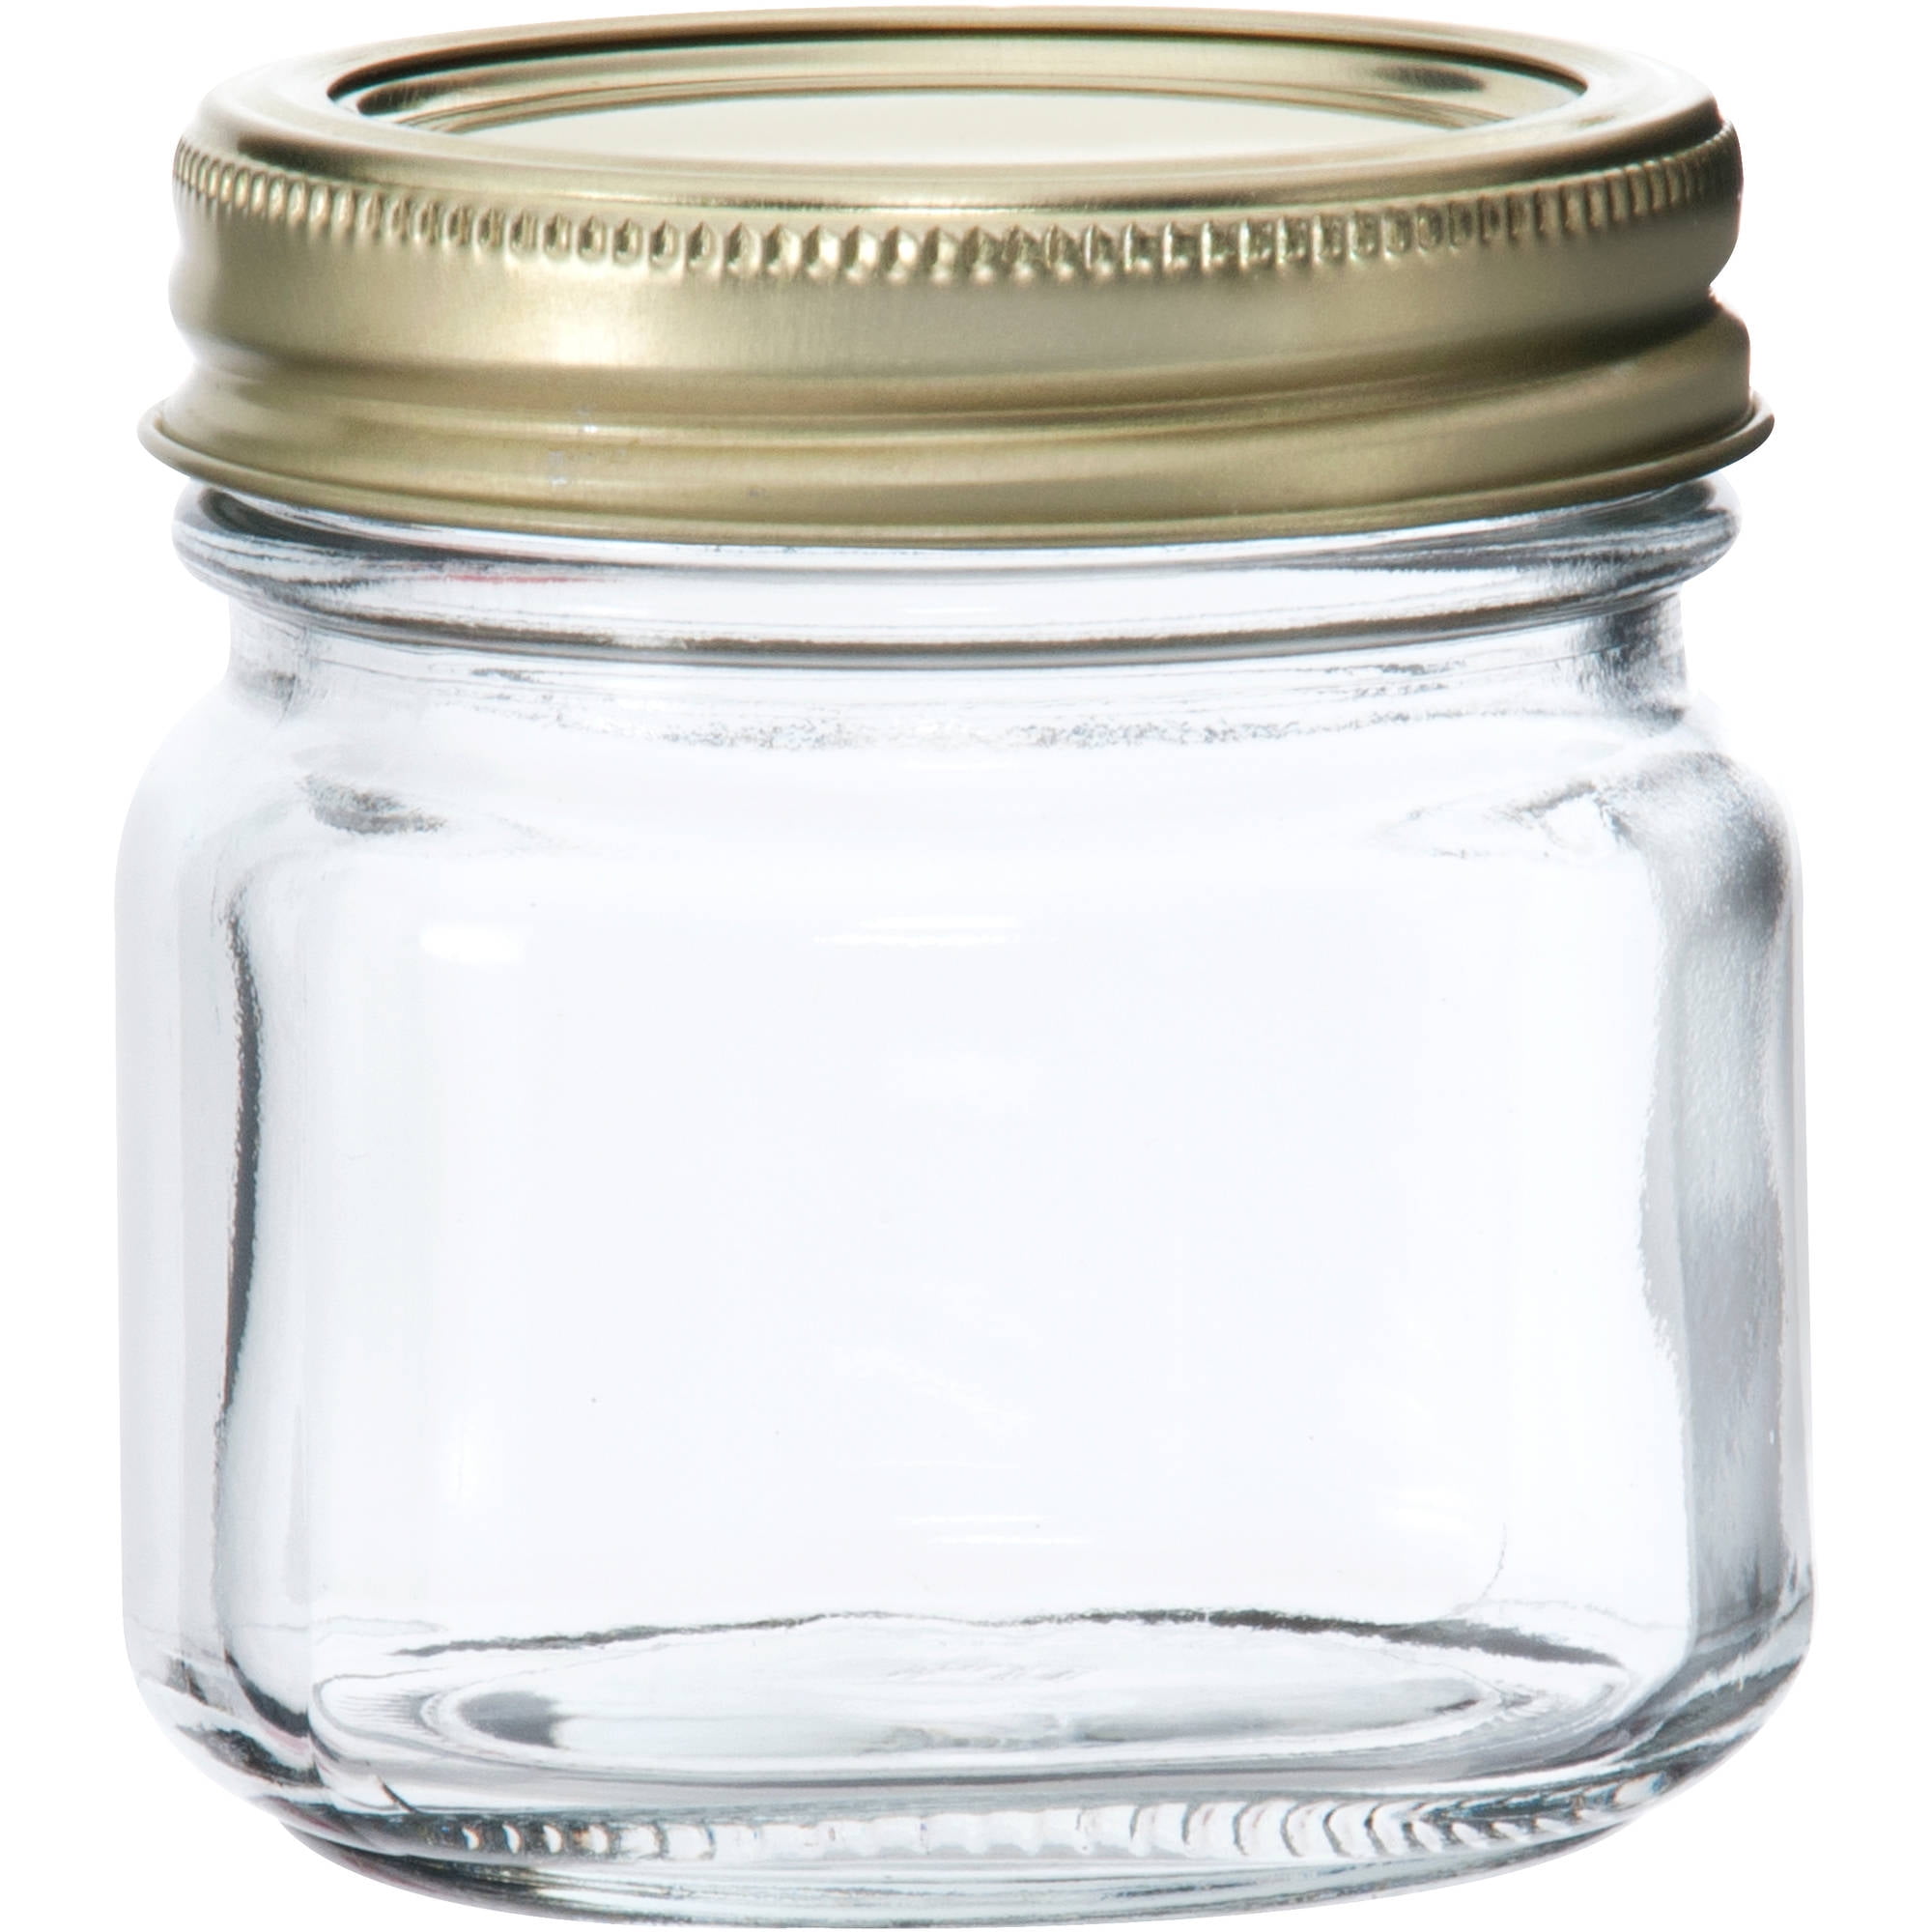 Set Of 12 Half-Pint Glass Canning Jar with Lids and rings FREE 2-5 DAY SHIPPING 